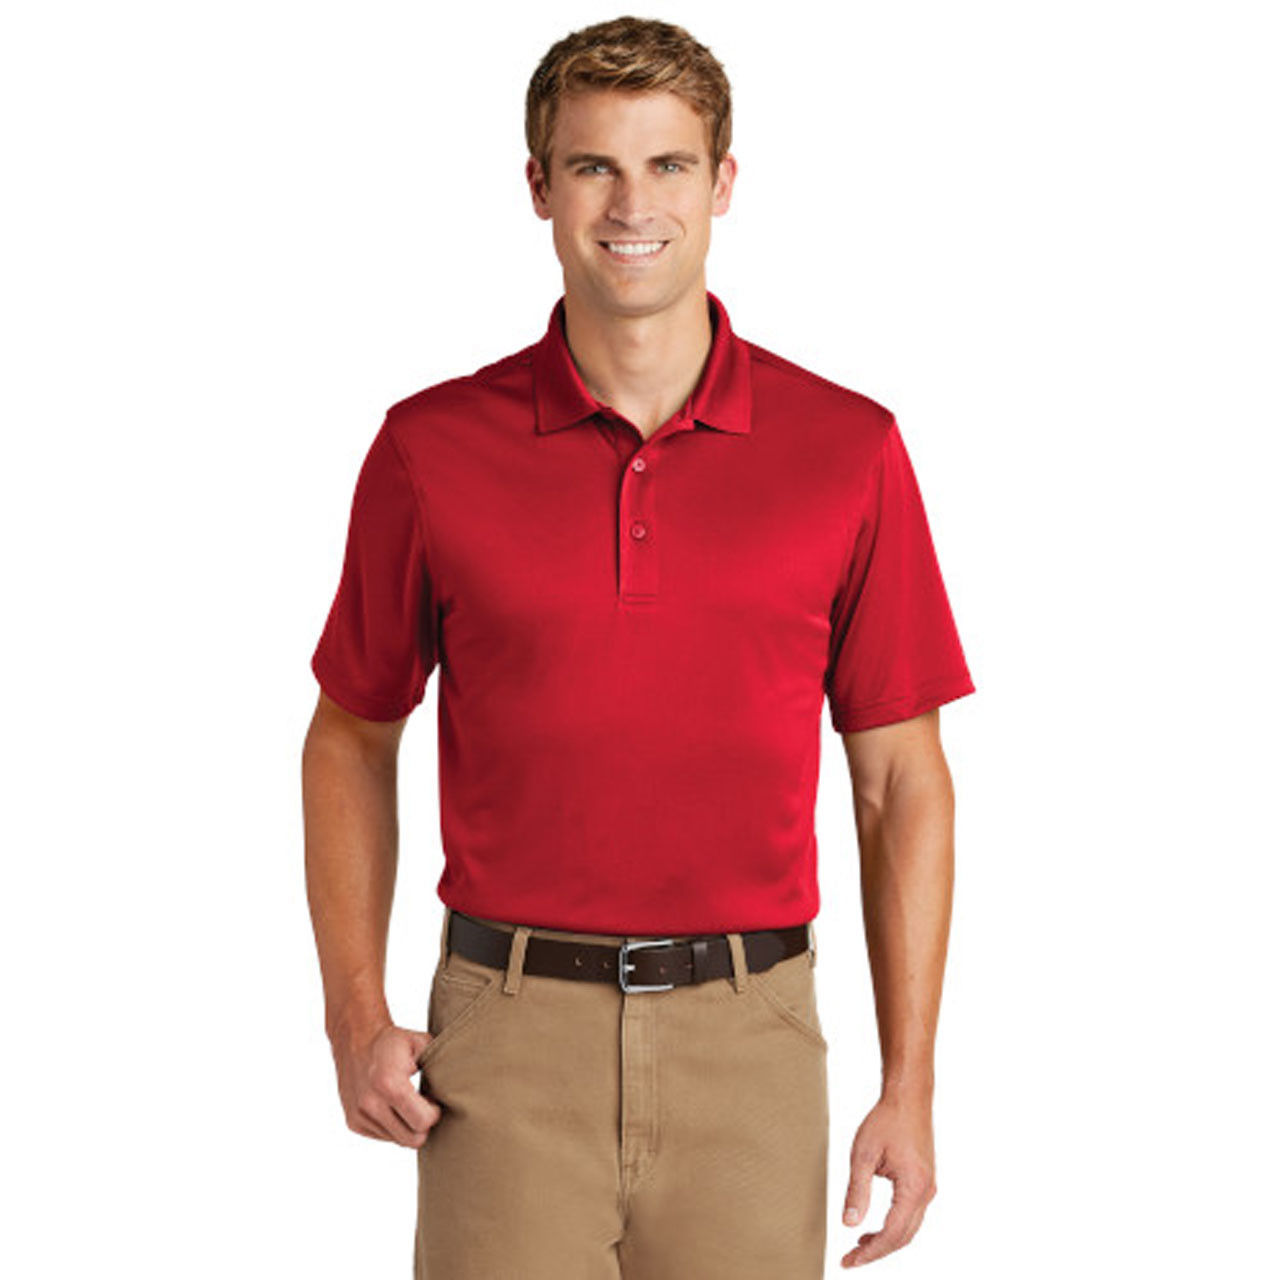 Before buying, can I get the red polo and khaki pants in less than case quantities?